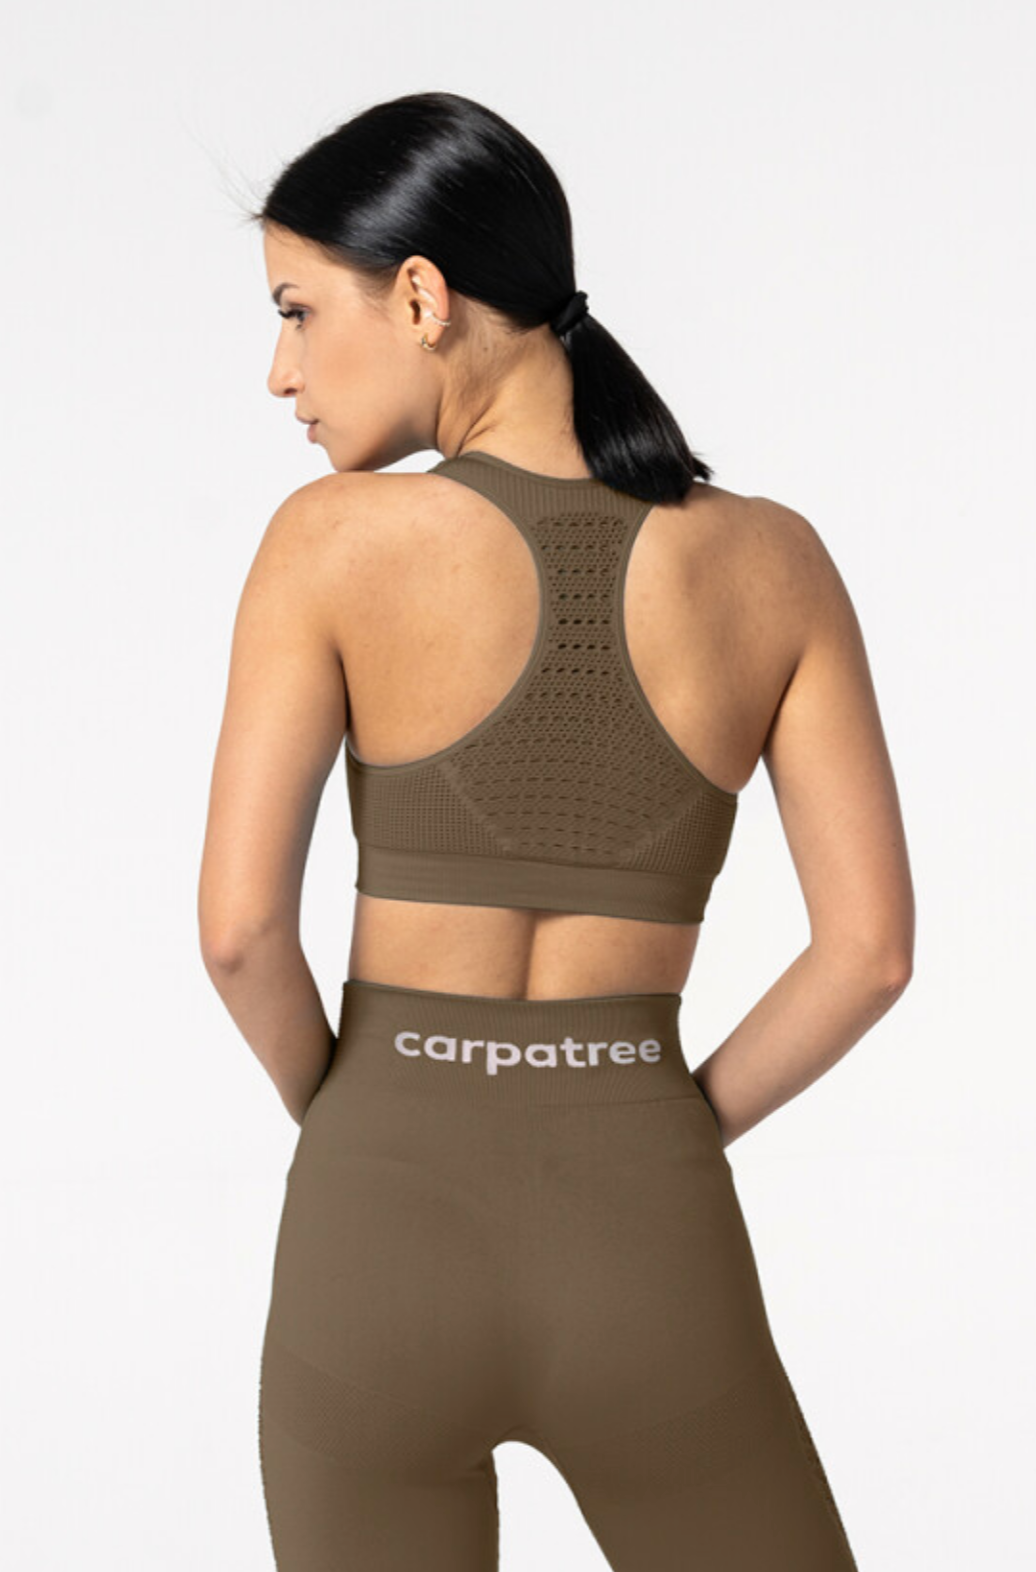 Carpatree Phase Seamless Bra - Khaki green / brown seamless sports bra with removable padding and razor back with crochet style detail.